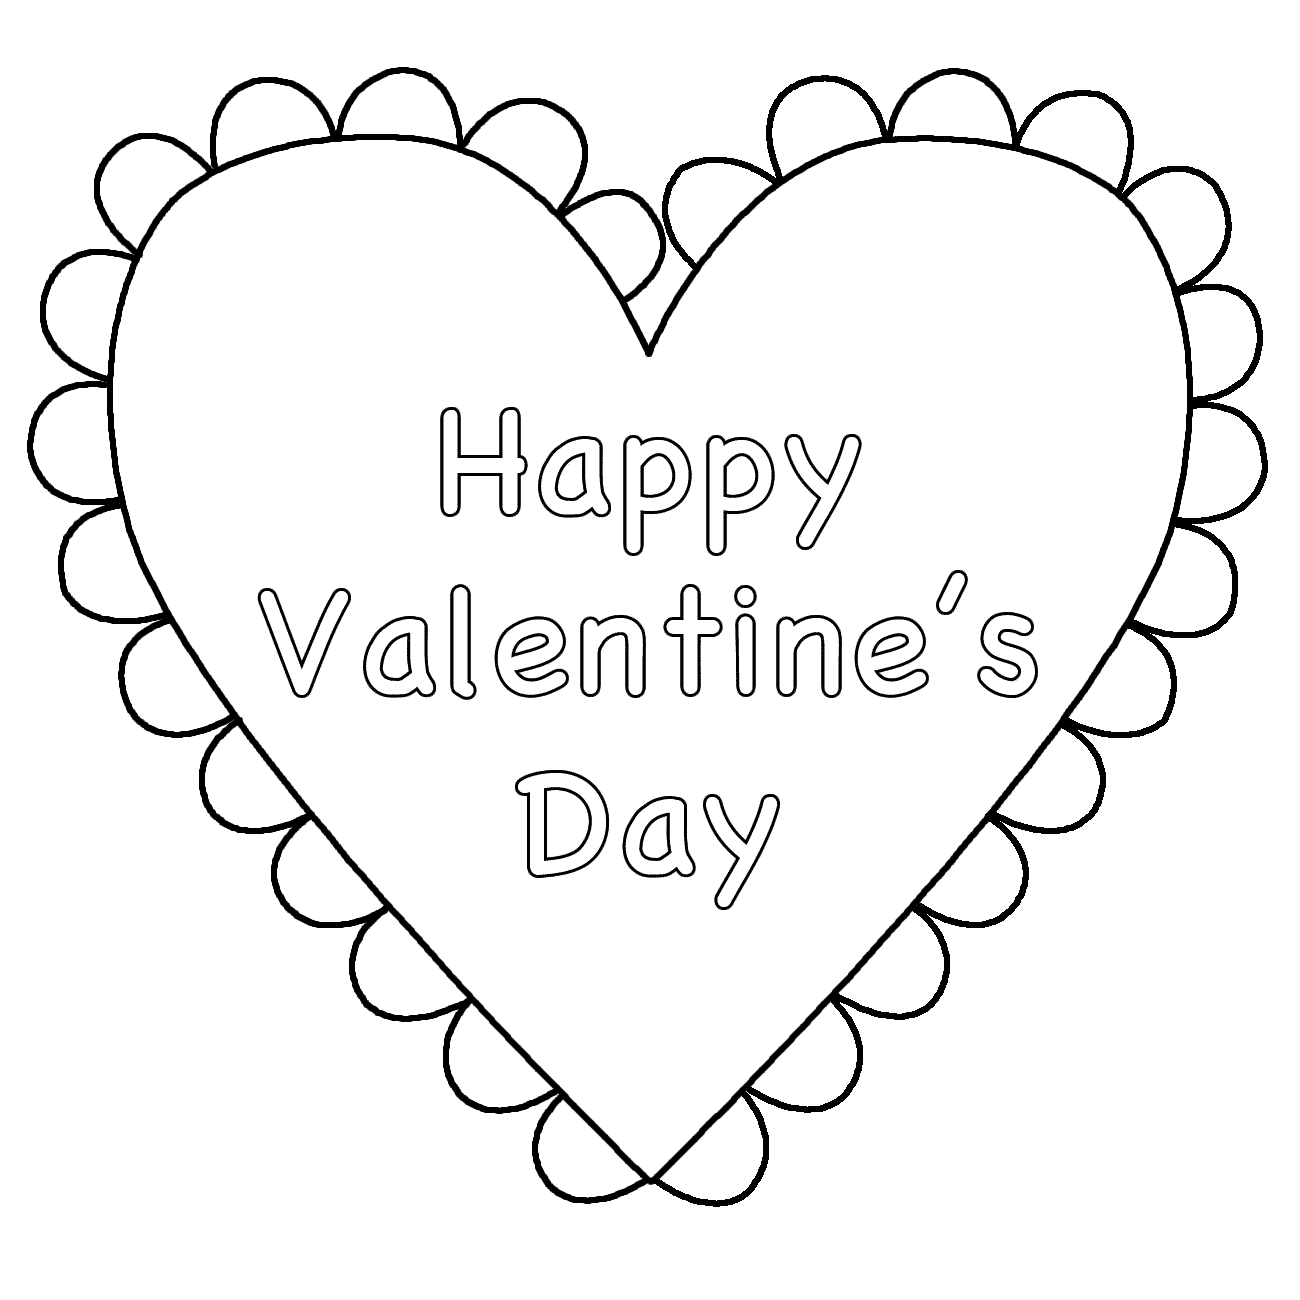 20 Valentine's Day Coloring Pages That Are Totally Free   So Festive